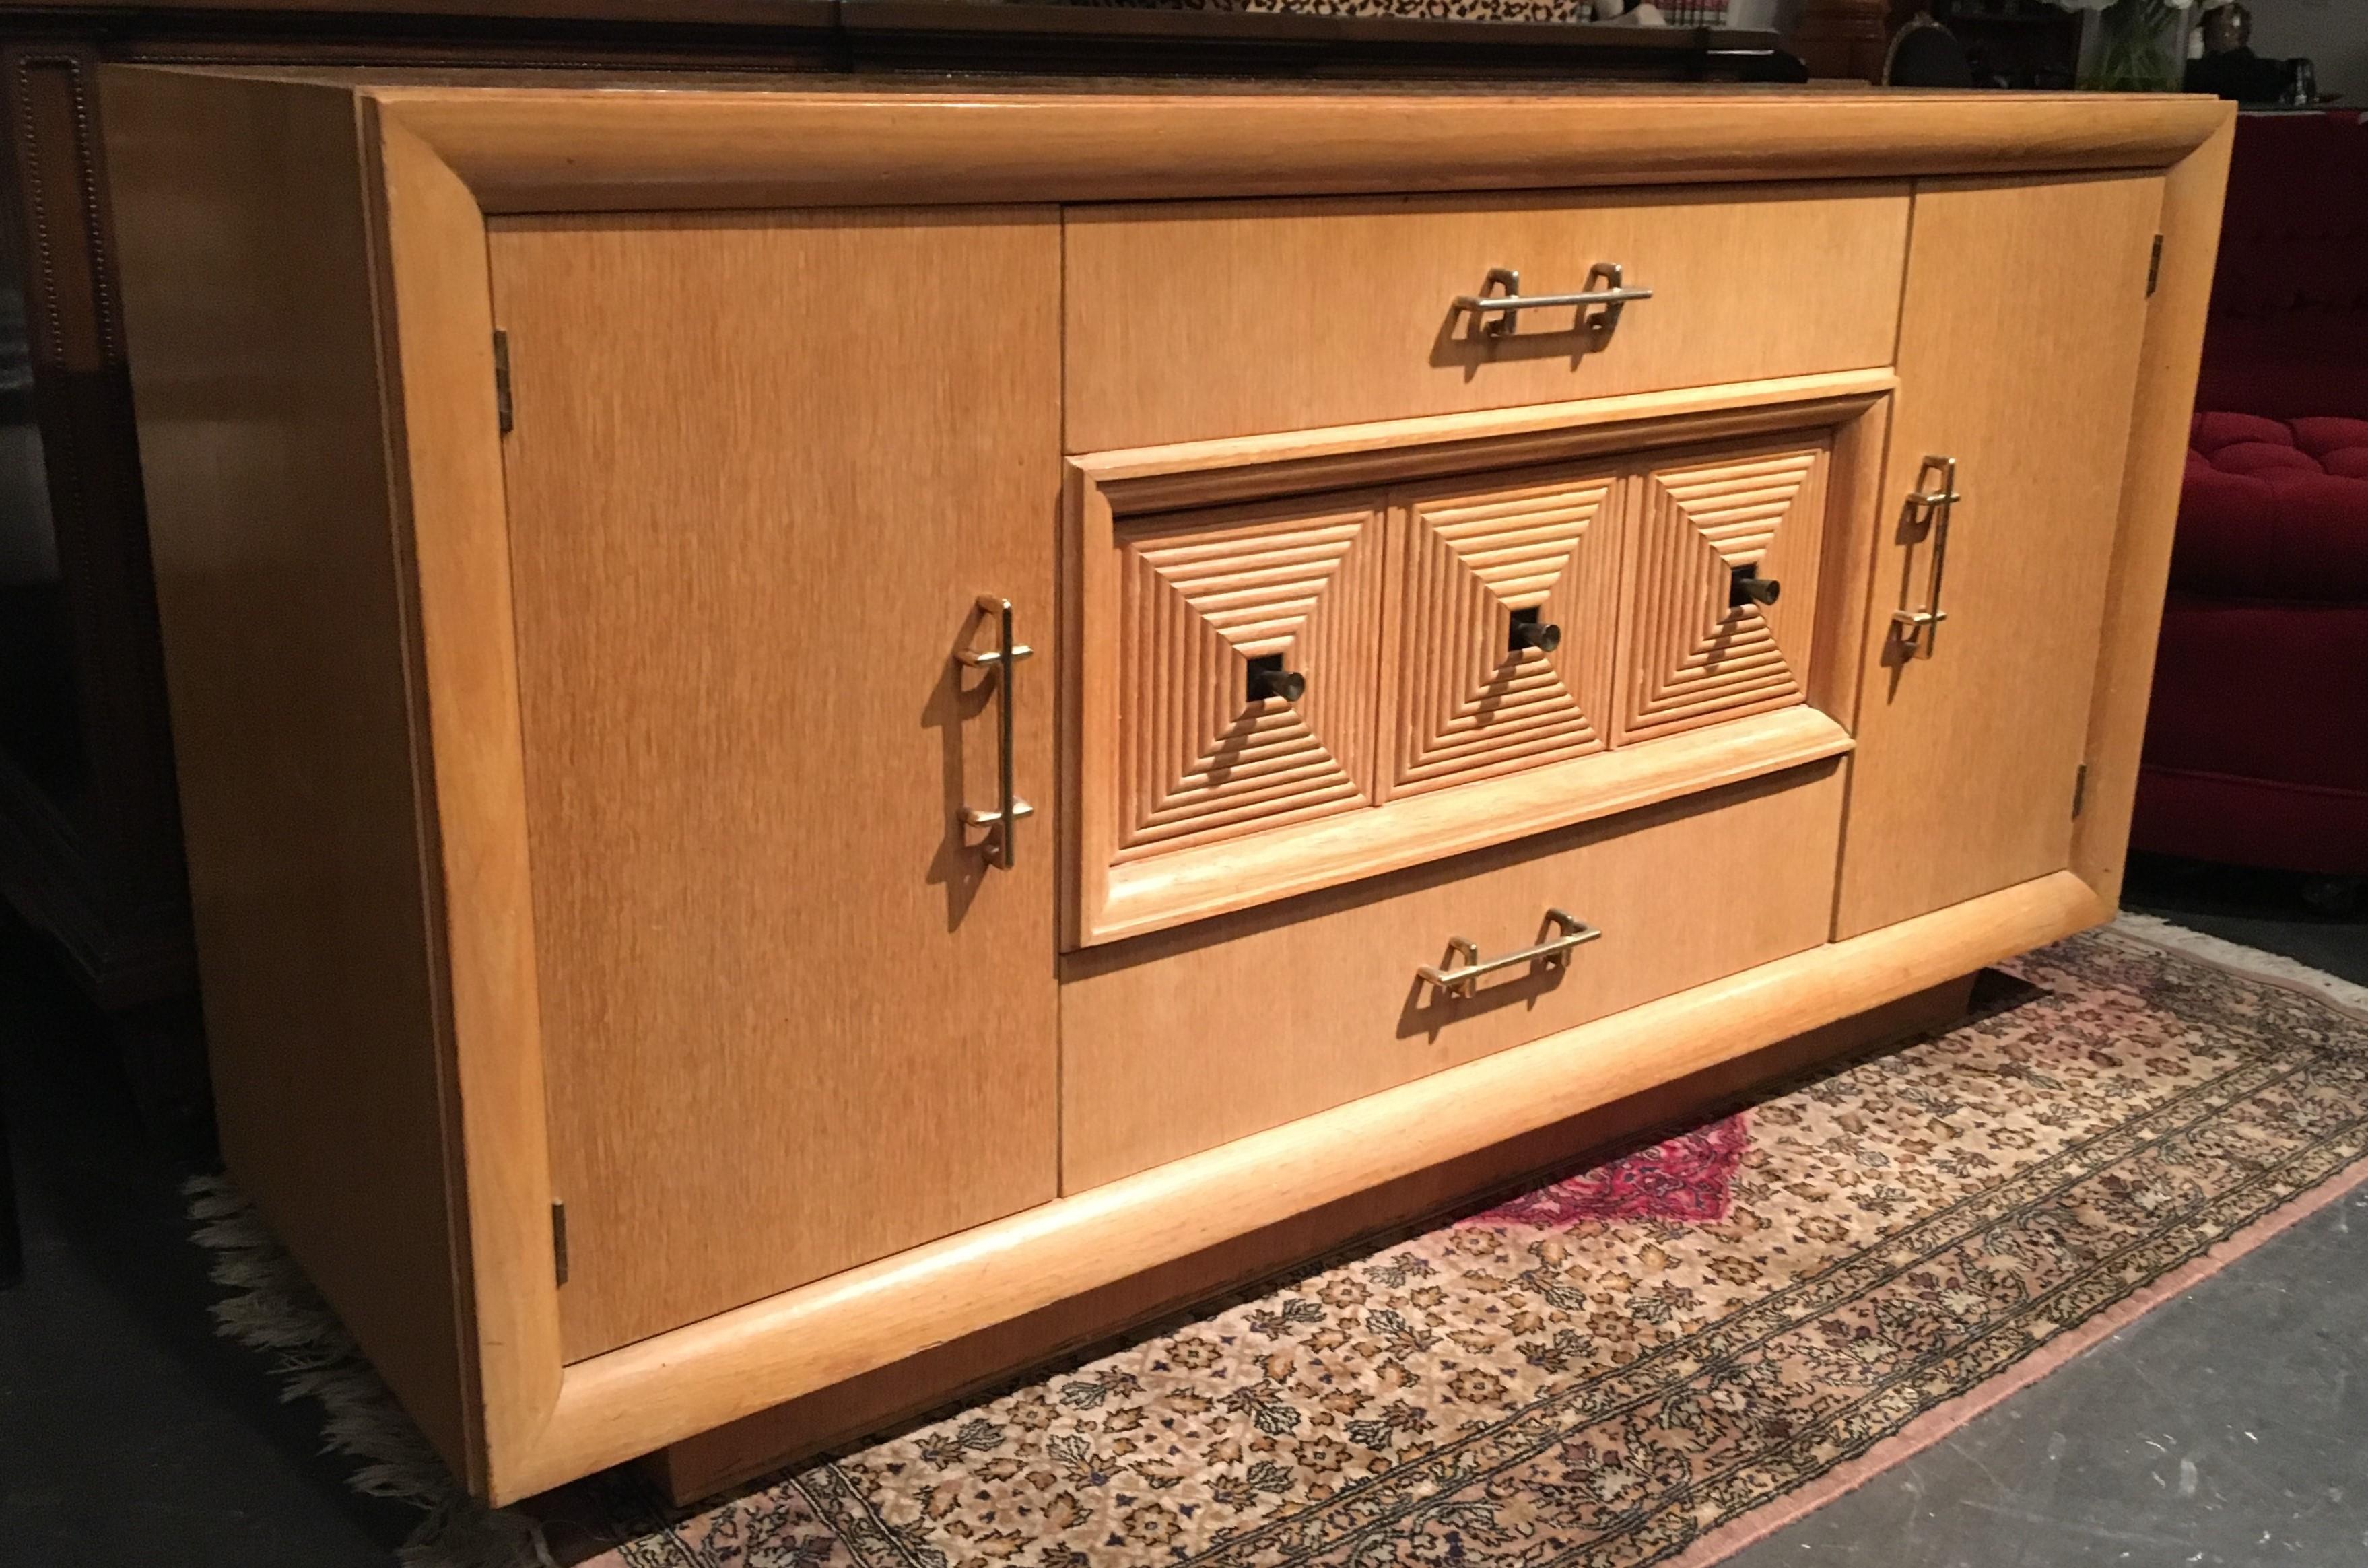 Beautiful French Art Deco 1940s cerused oak credenza or sideboard. Centered is a three-drawer unit flanked by two cabinet doors with open storage, resting on a plinth base. The middle drawer decorated with multiple square elements with brass